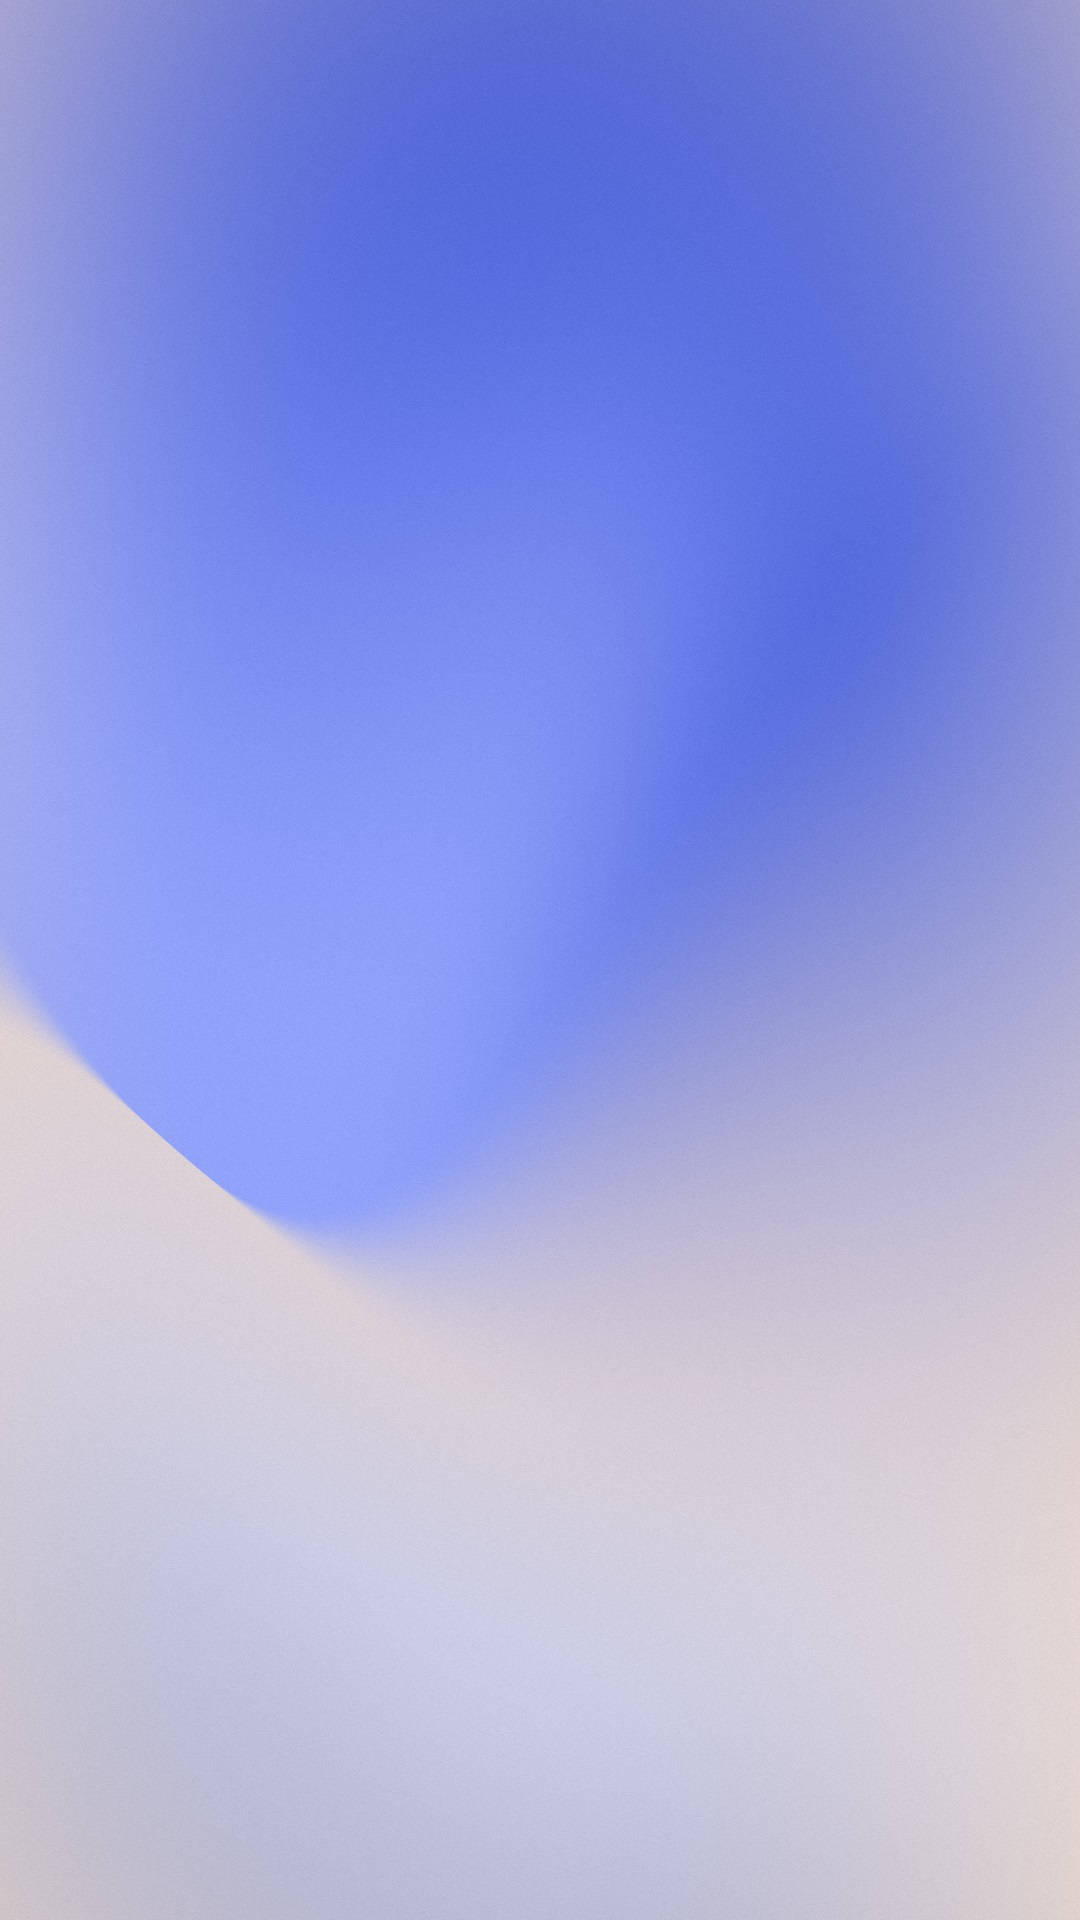 Google Pixel Blue And White Background